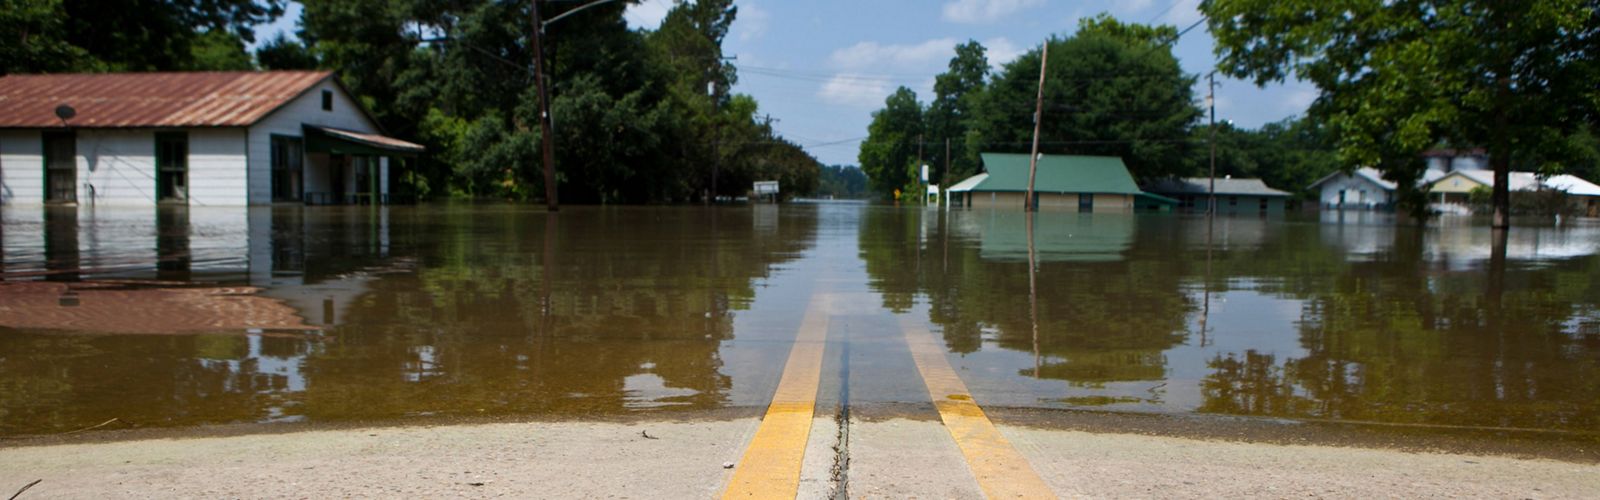 High water from mississippi river flooding a road with double yellow line in louisiana